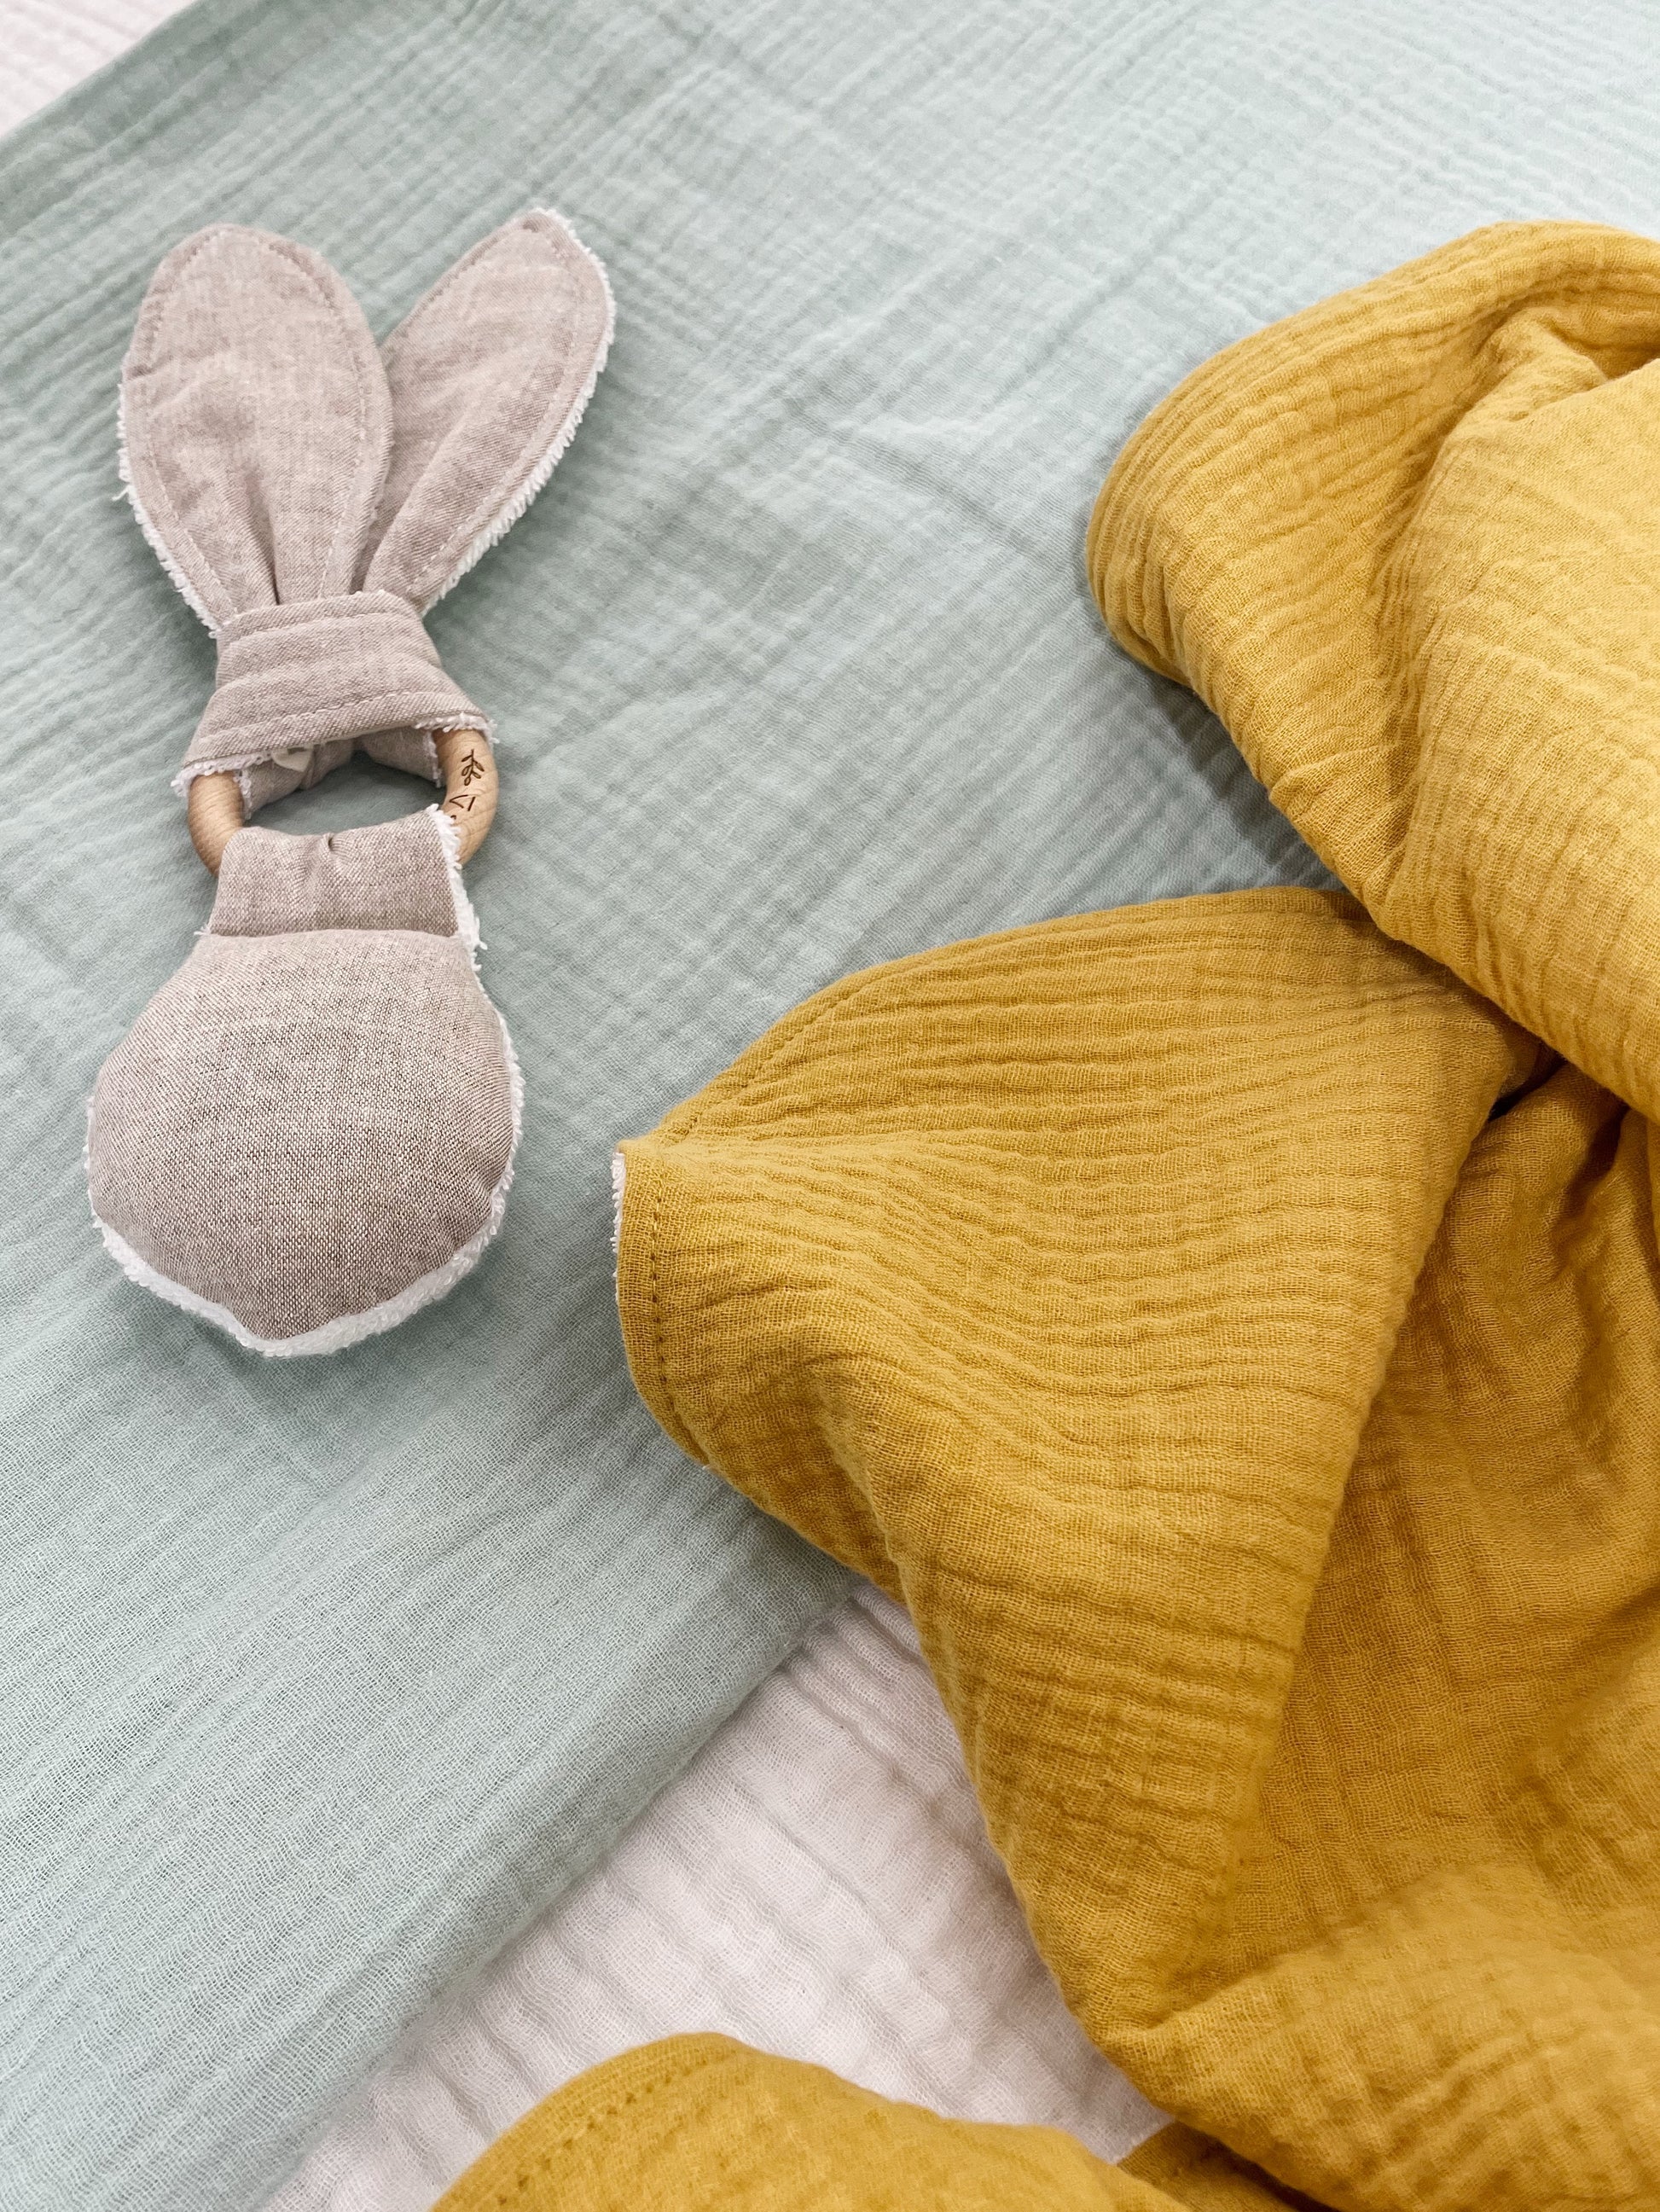 greige rabbit rattle teether on top of a mint green blanket and next to a mustard blanket